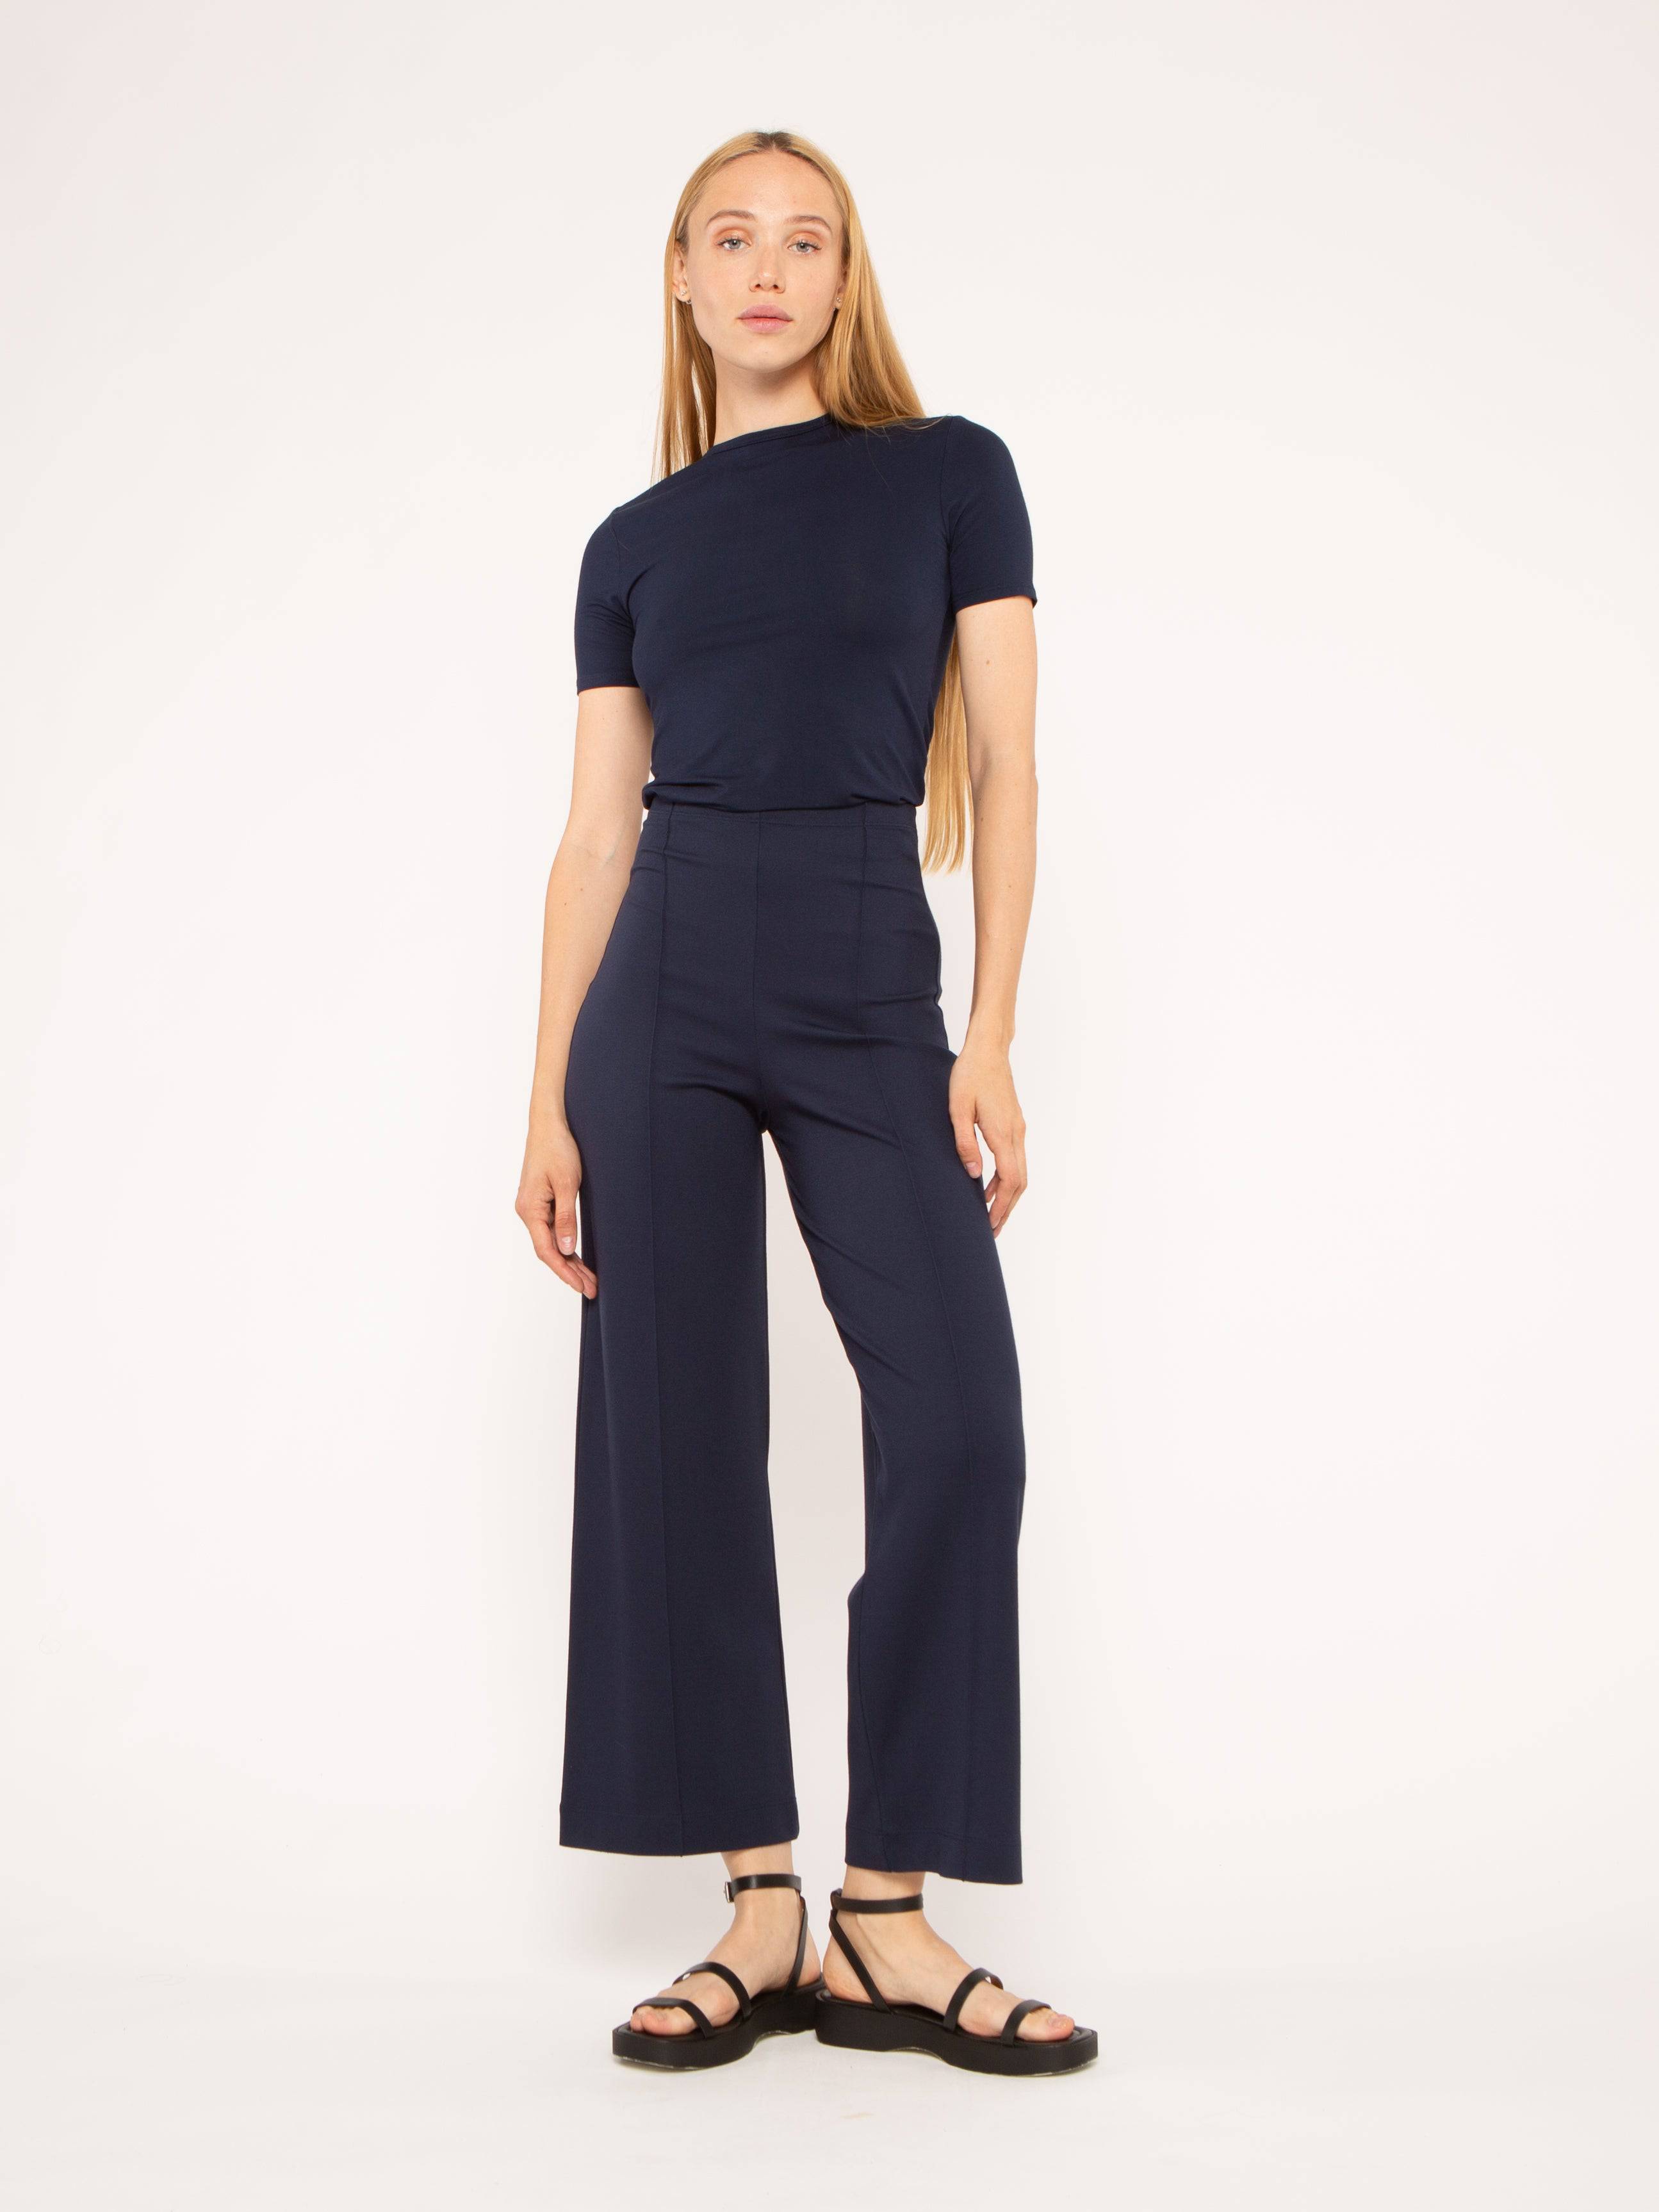 Image of Navy Ponte Knit Straight Leg Pant: Cropped